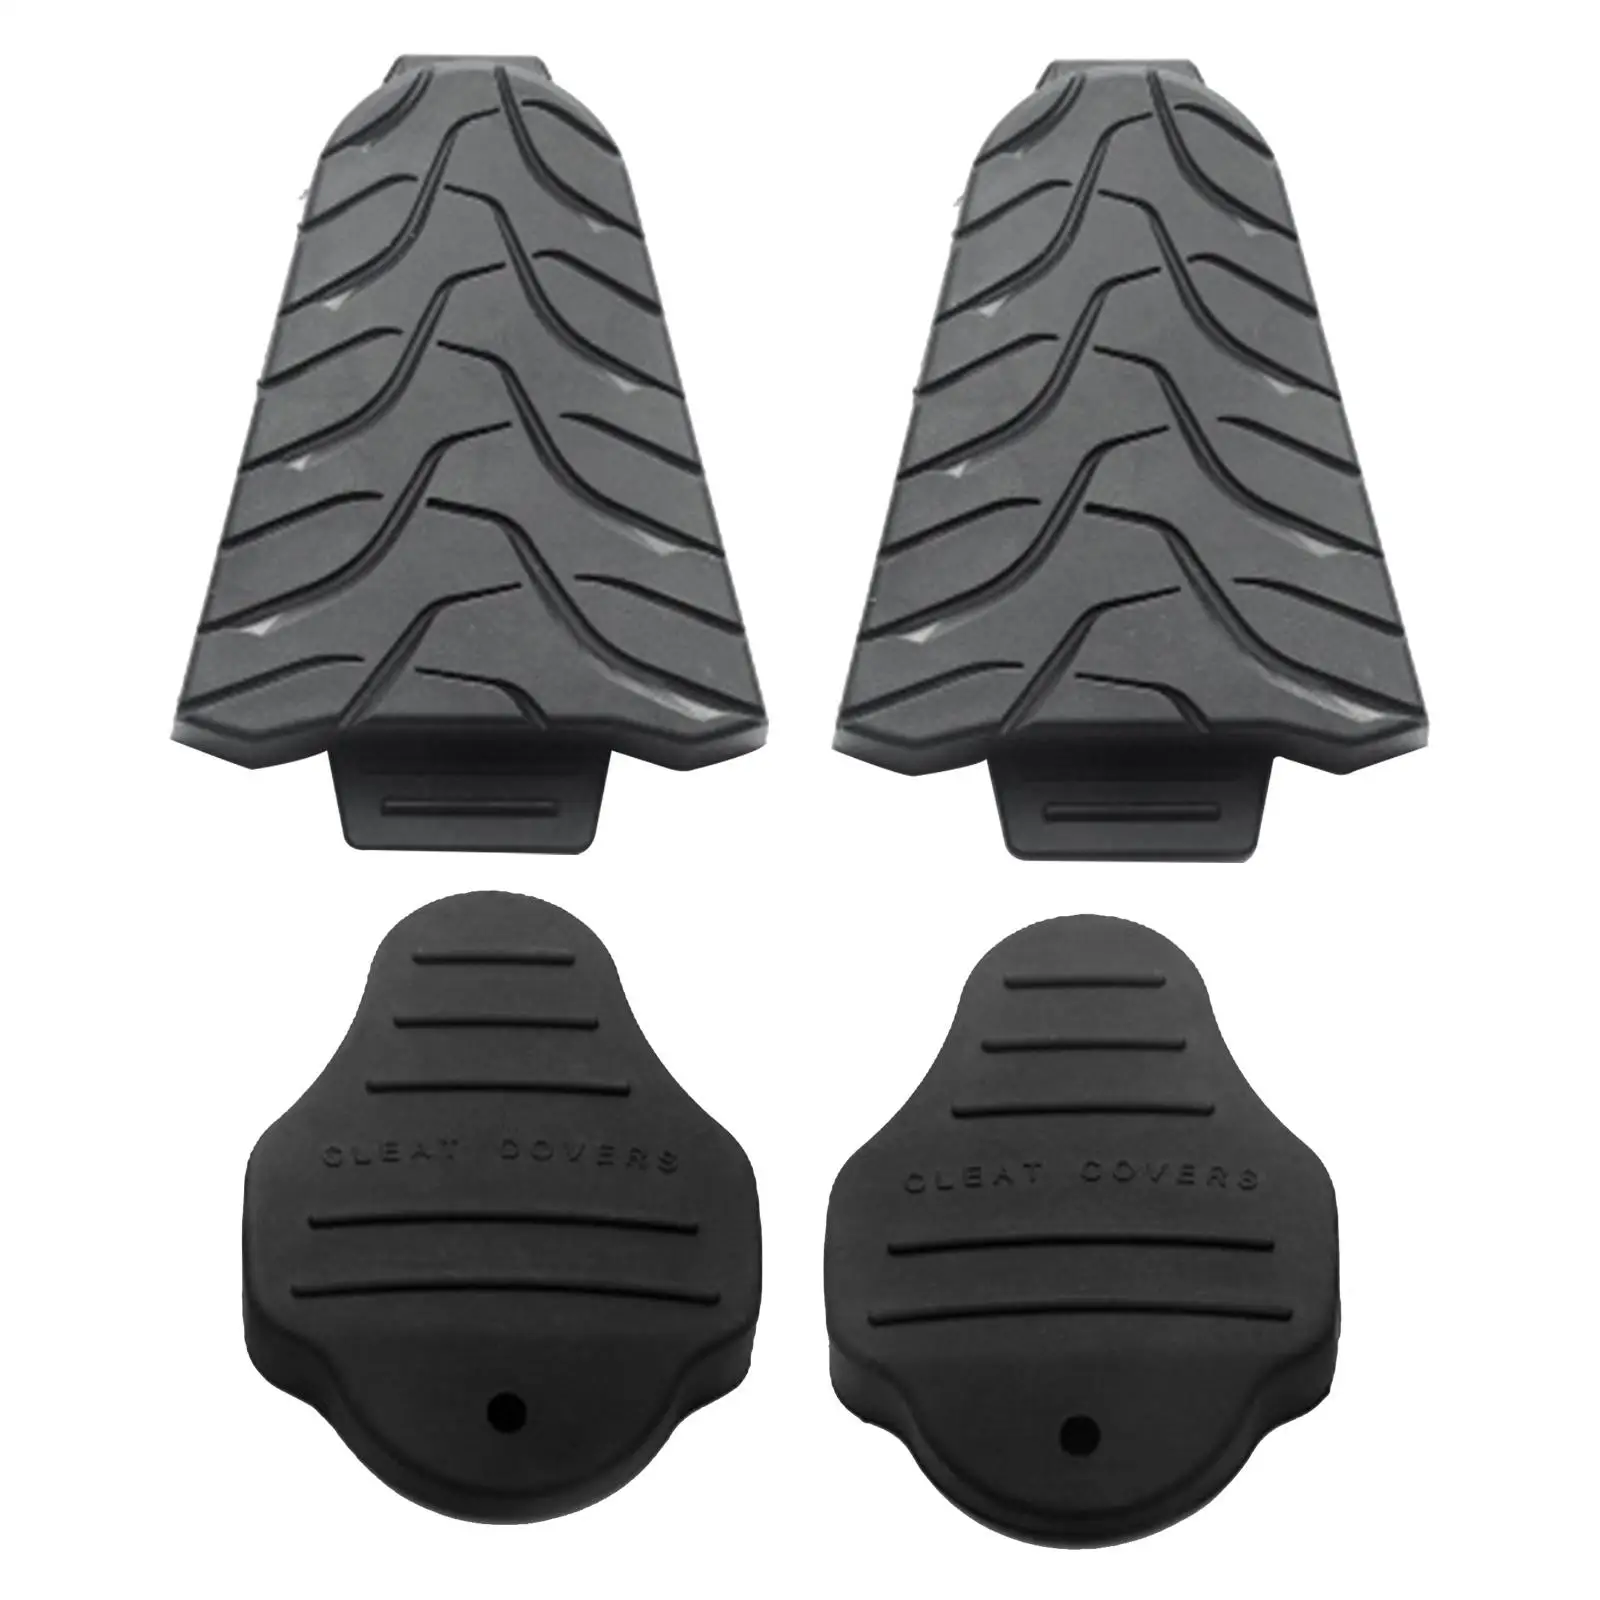 2x Bicycle Shoes Cleats Protector Quick Release Universal Durable Adding Grip and Comfort Bike Cleat Cover Anti Slip